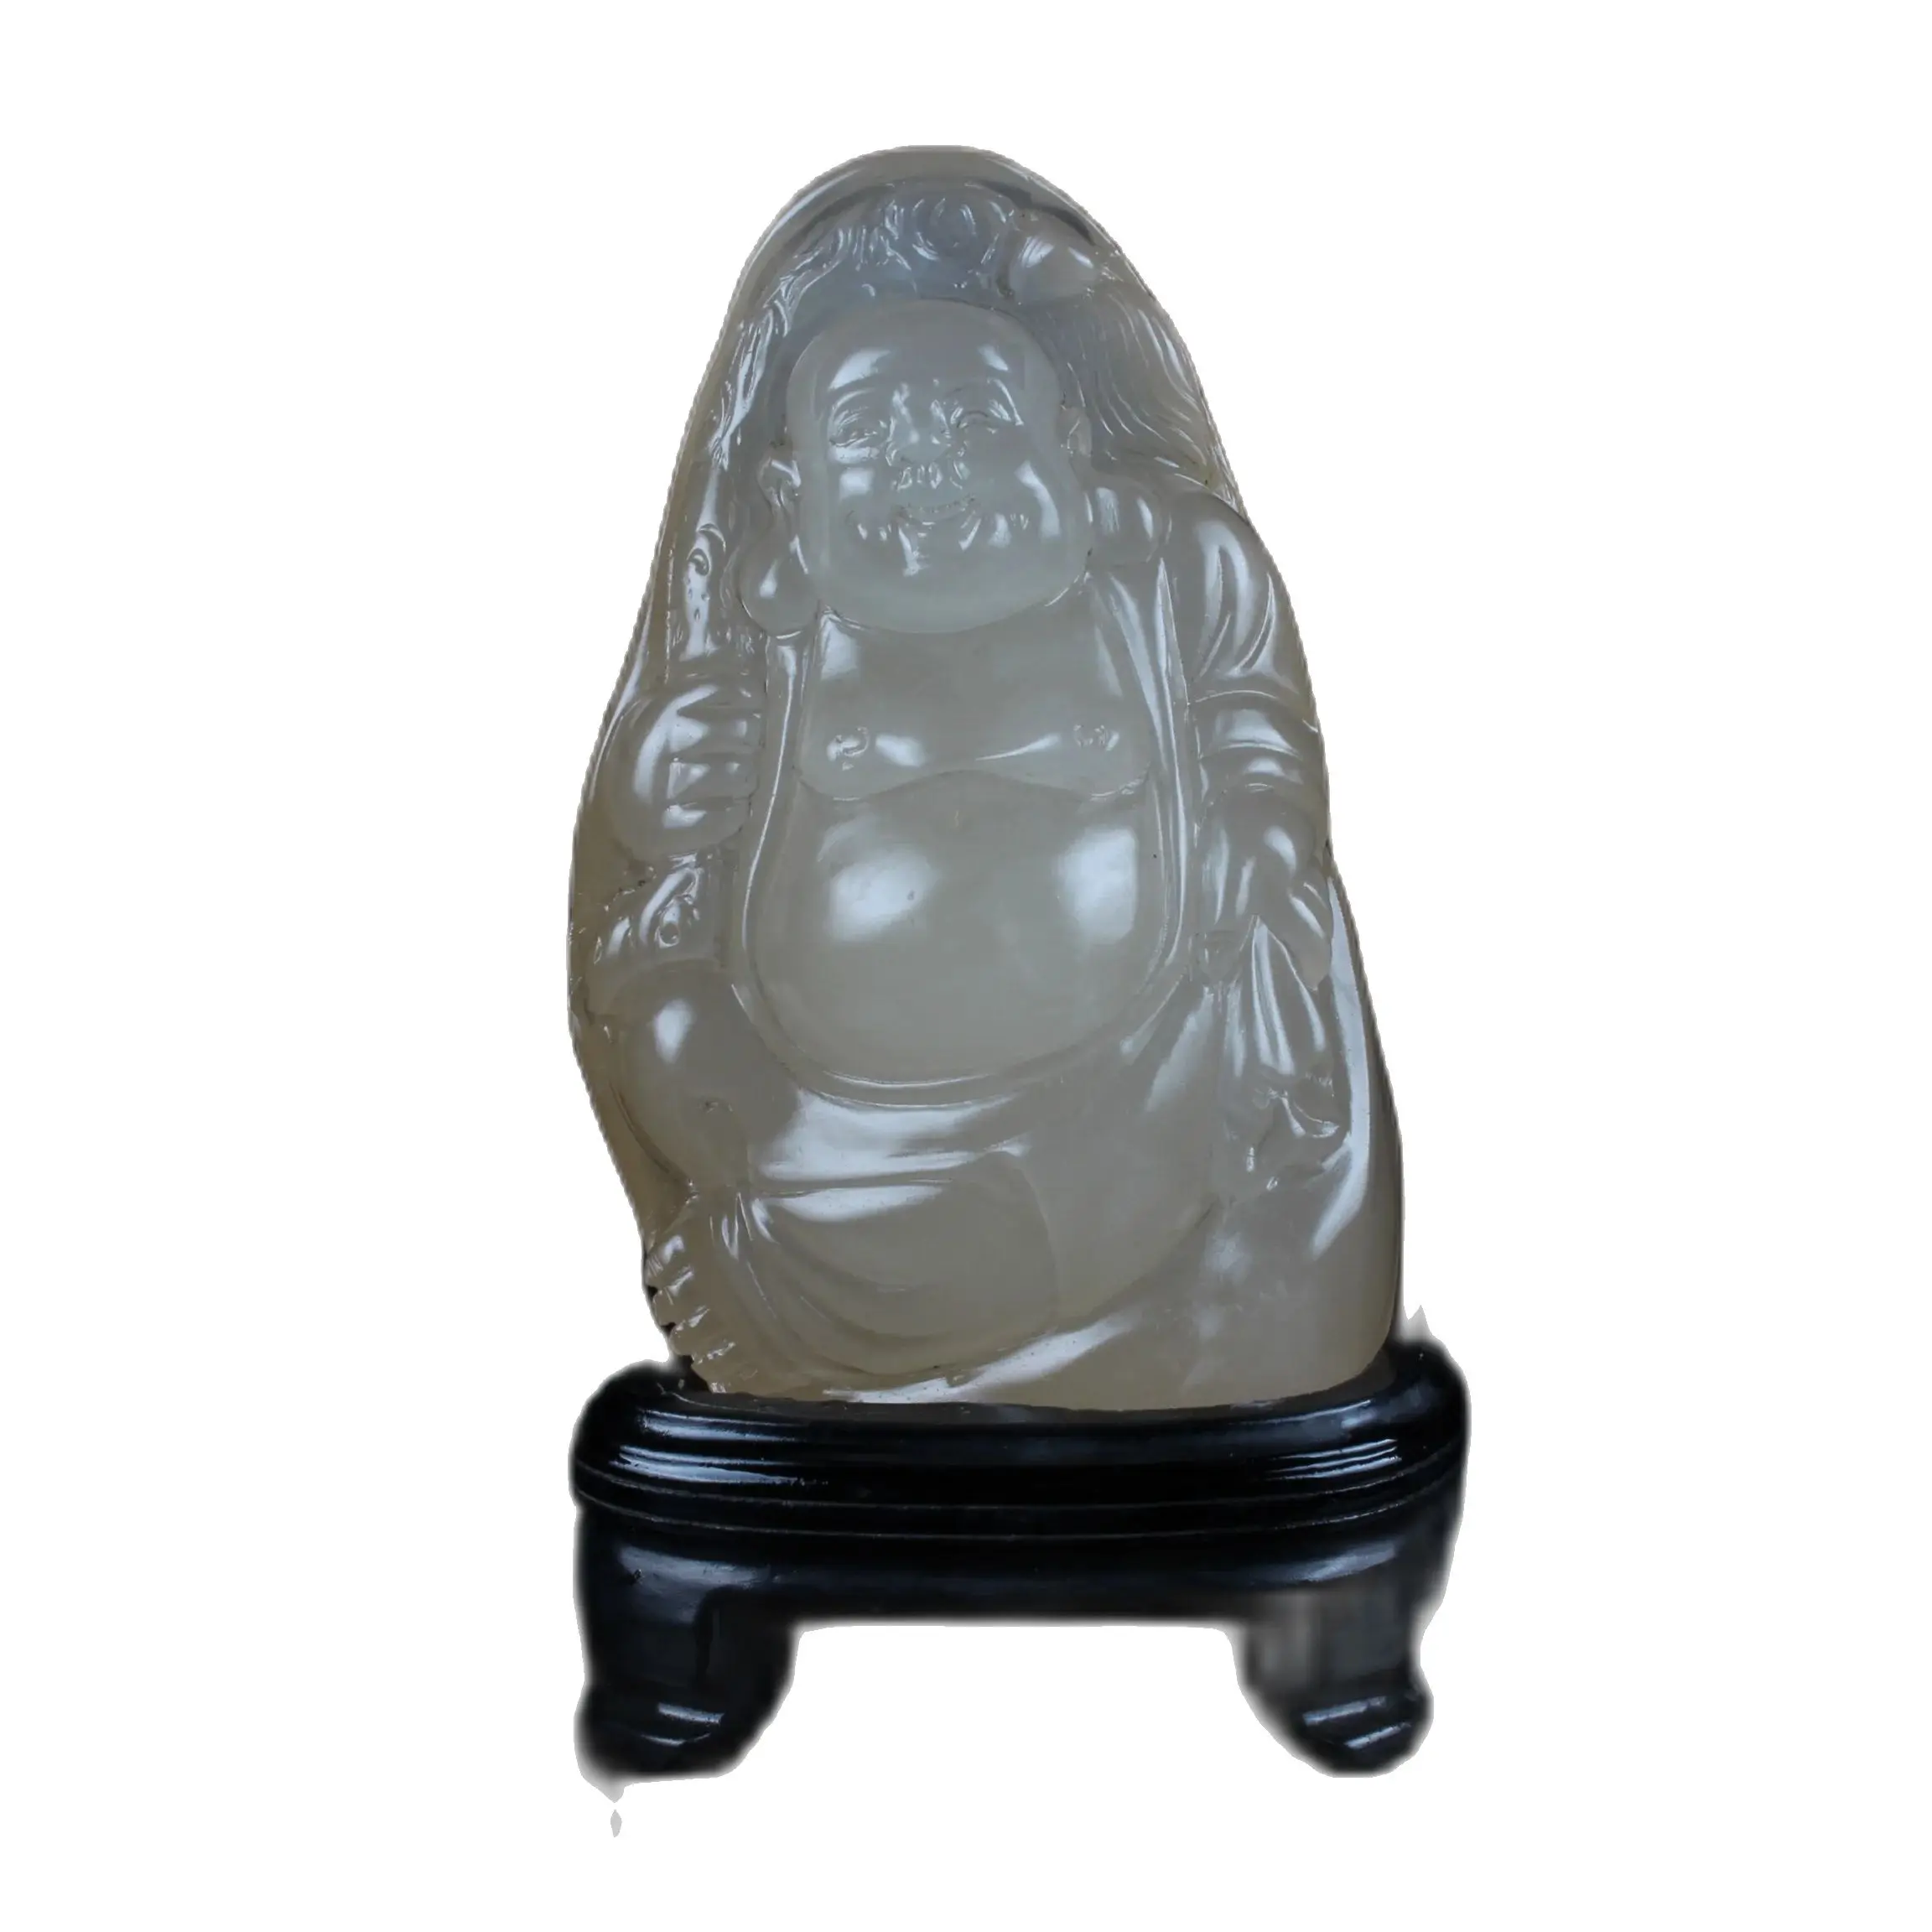 

China Collection Agate Exquisite Hand Carved Maitreya Buddha Pattern Statue Home decoration Ornaments Exhibits